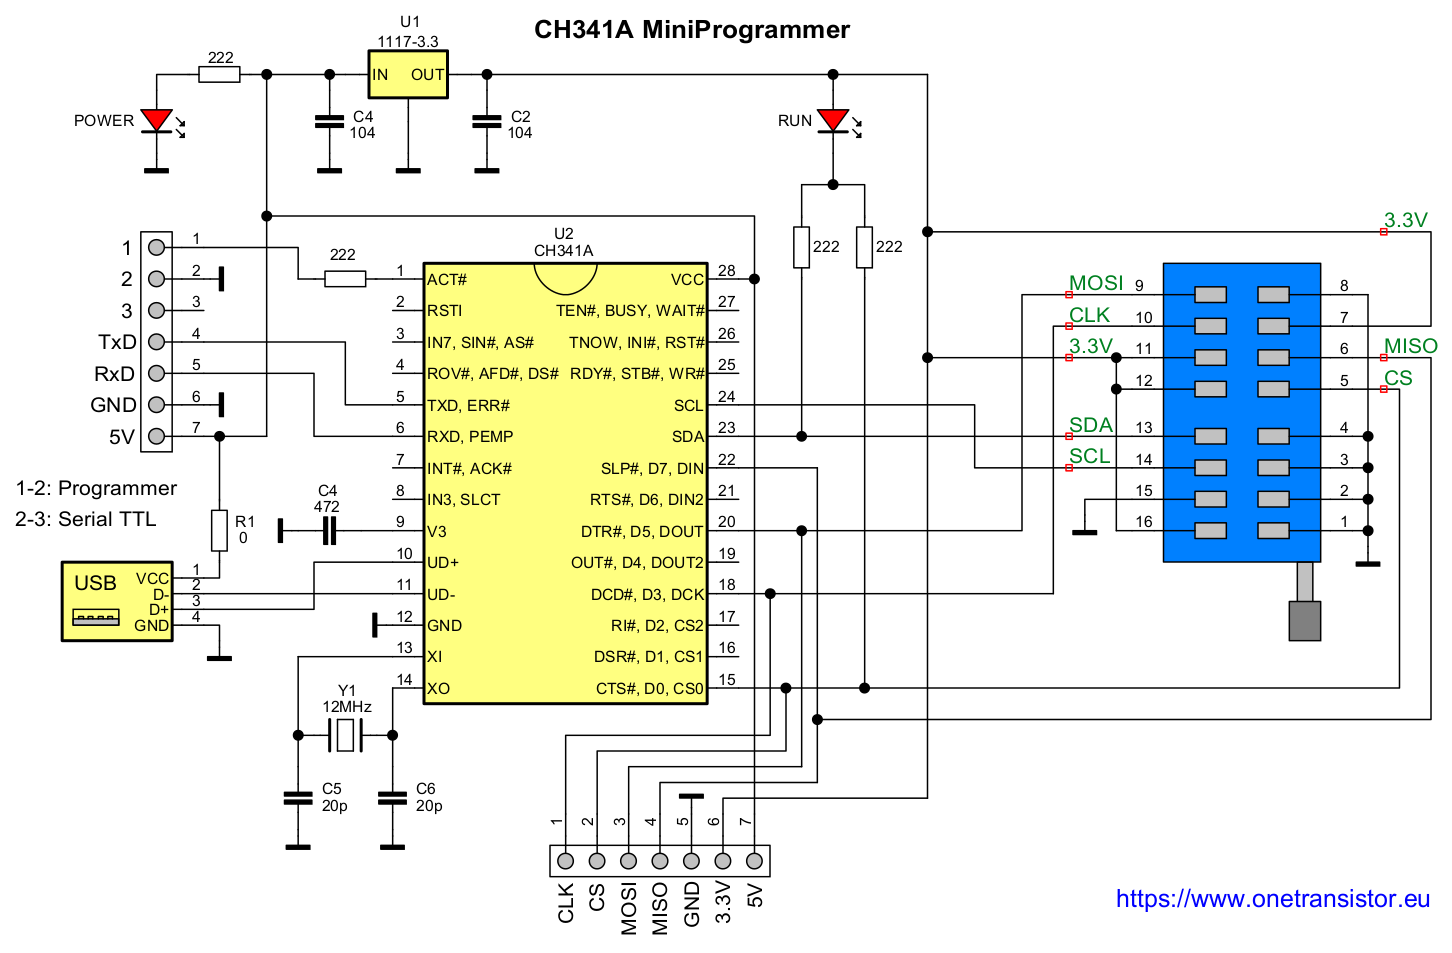 Communism shortness of breath story CH341A Mini Programmer Schematic and Drivers · One Transistor